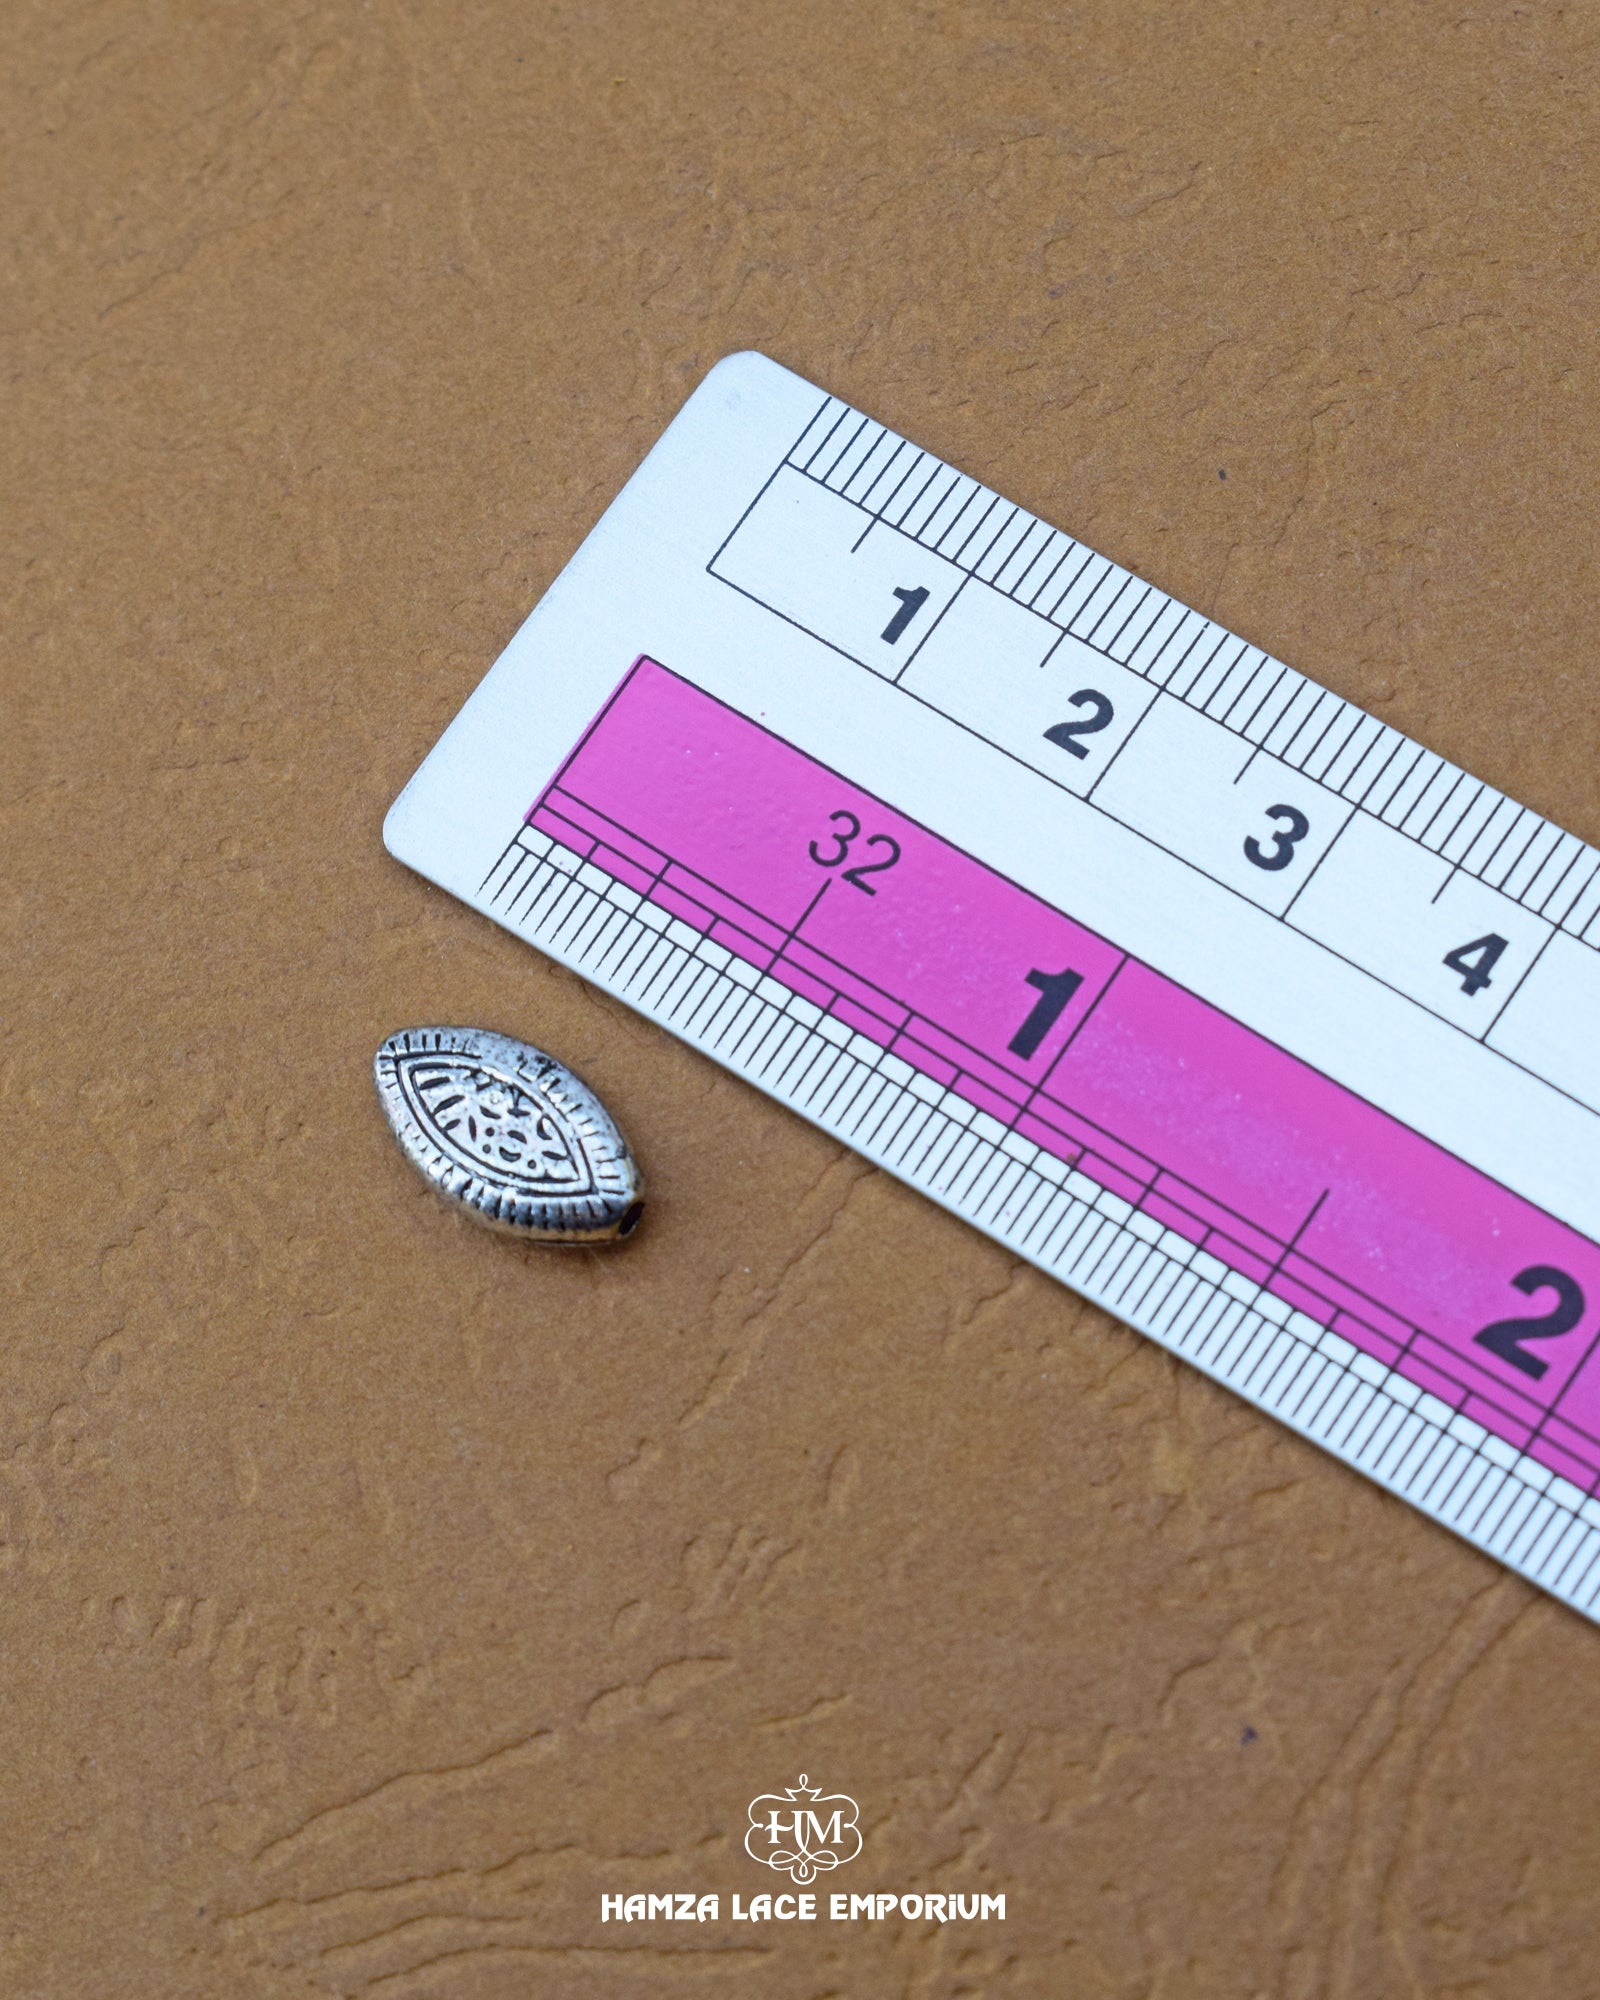 The size of the Beautifully designed 'Hanging Button MA335' is measured by using a ruler